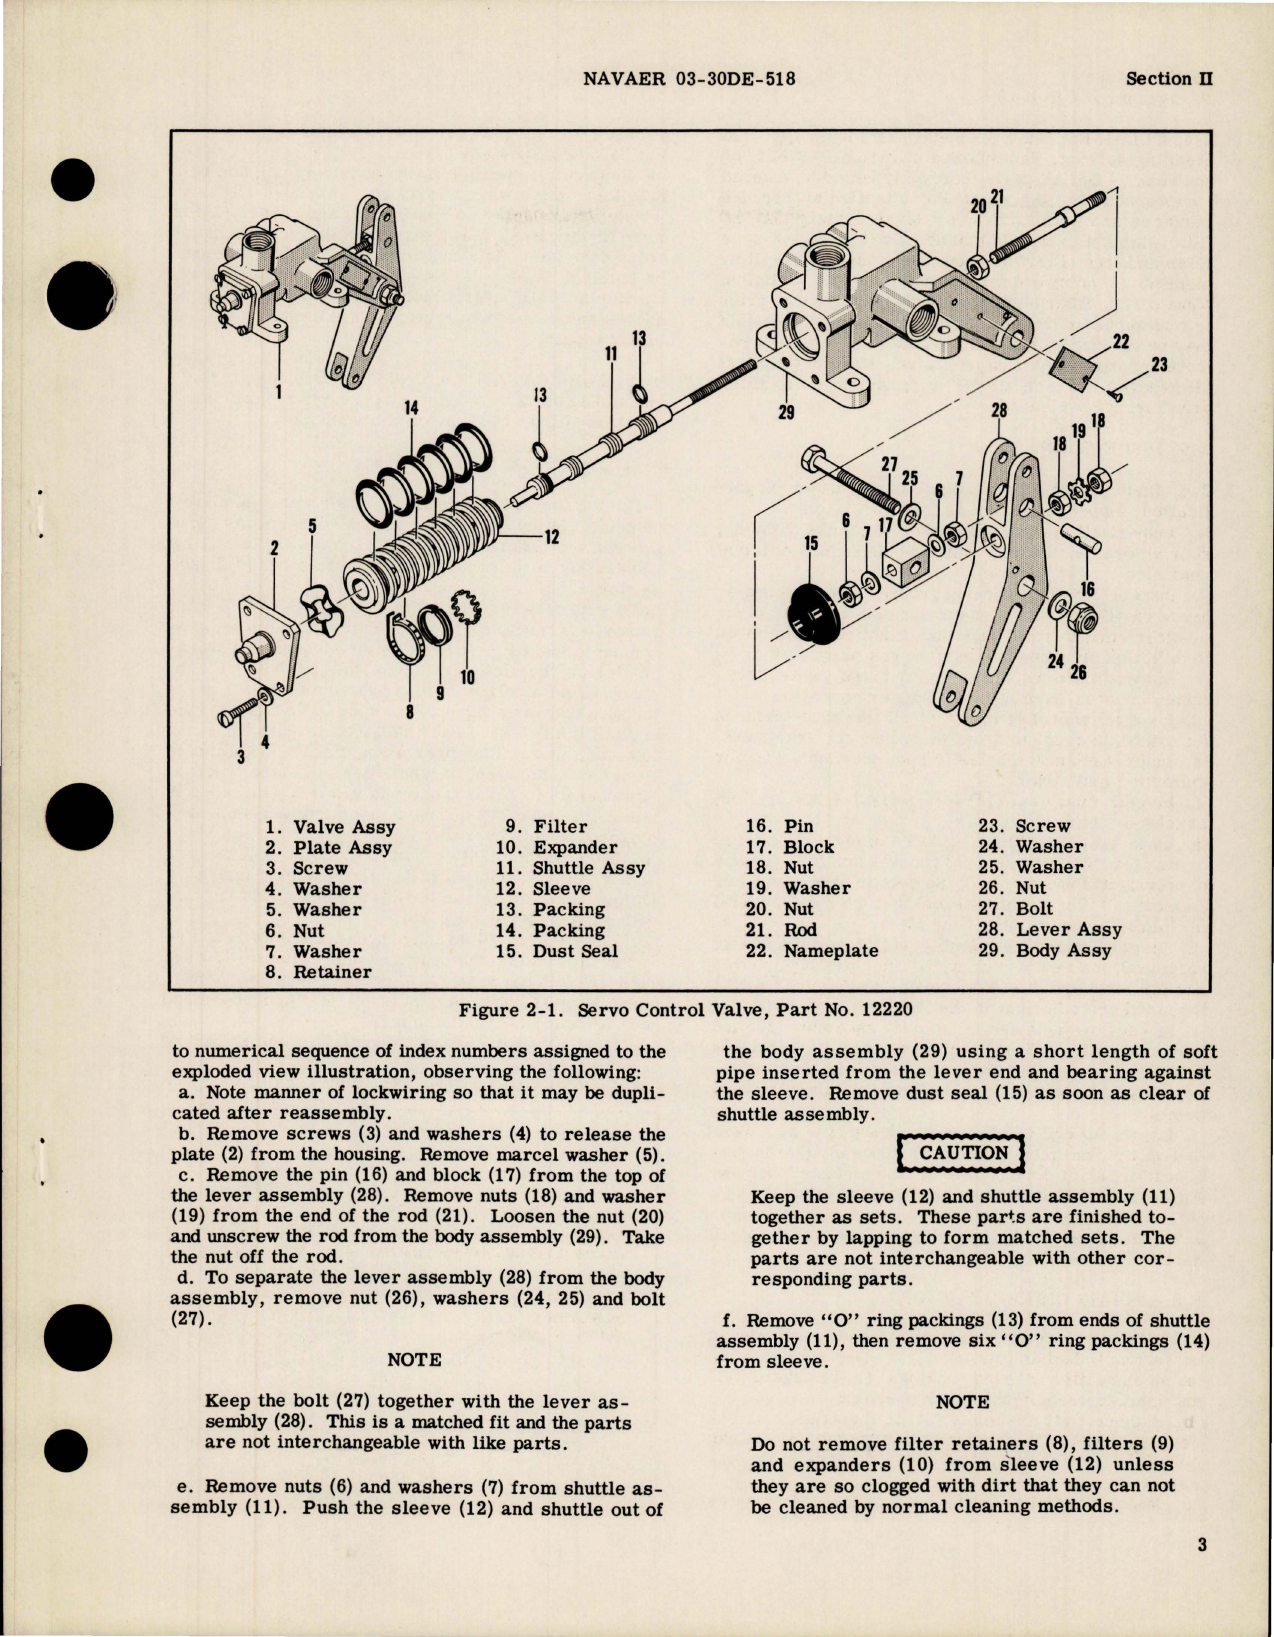 Sample page 5 from AirCorps Library document: Overhaul Instructions for Servo Control Valve - Part 12220 